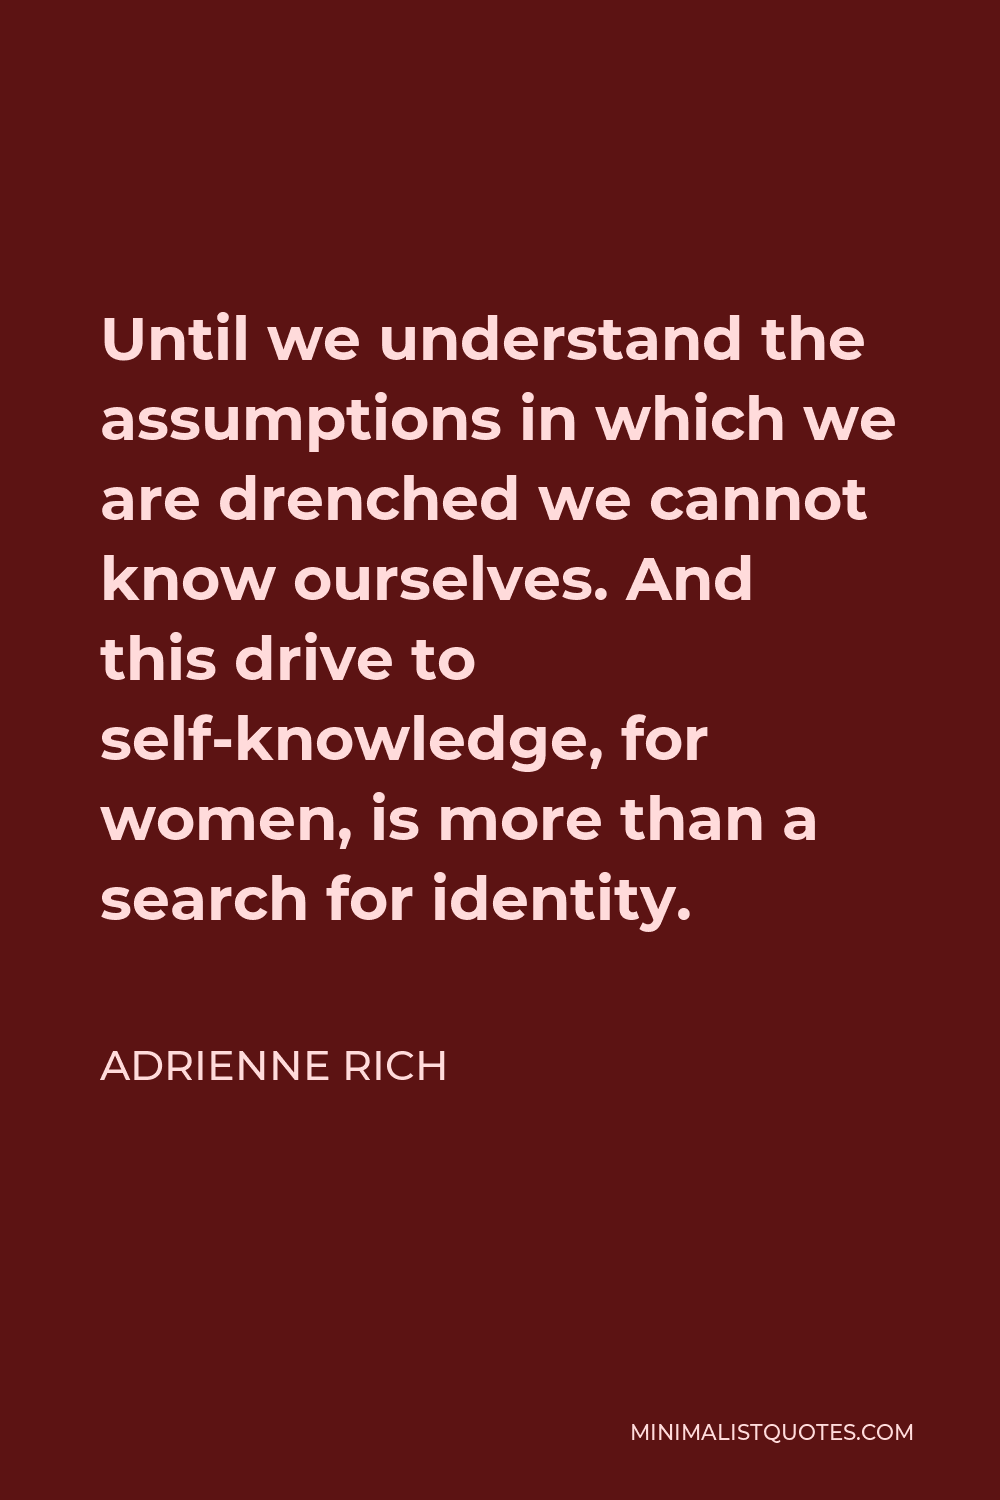 Adrienne Rich Quote - Until we understand the assumptions in which we are drenched we cannot know ourselves. And this drive to self-knowledge, for women, is more than a search for identity.